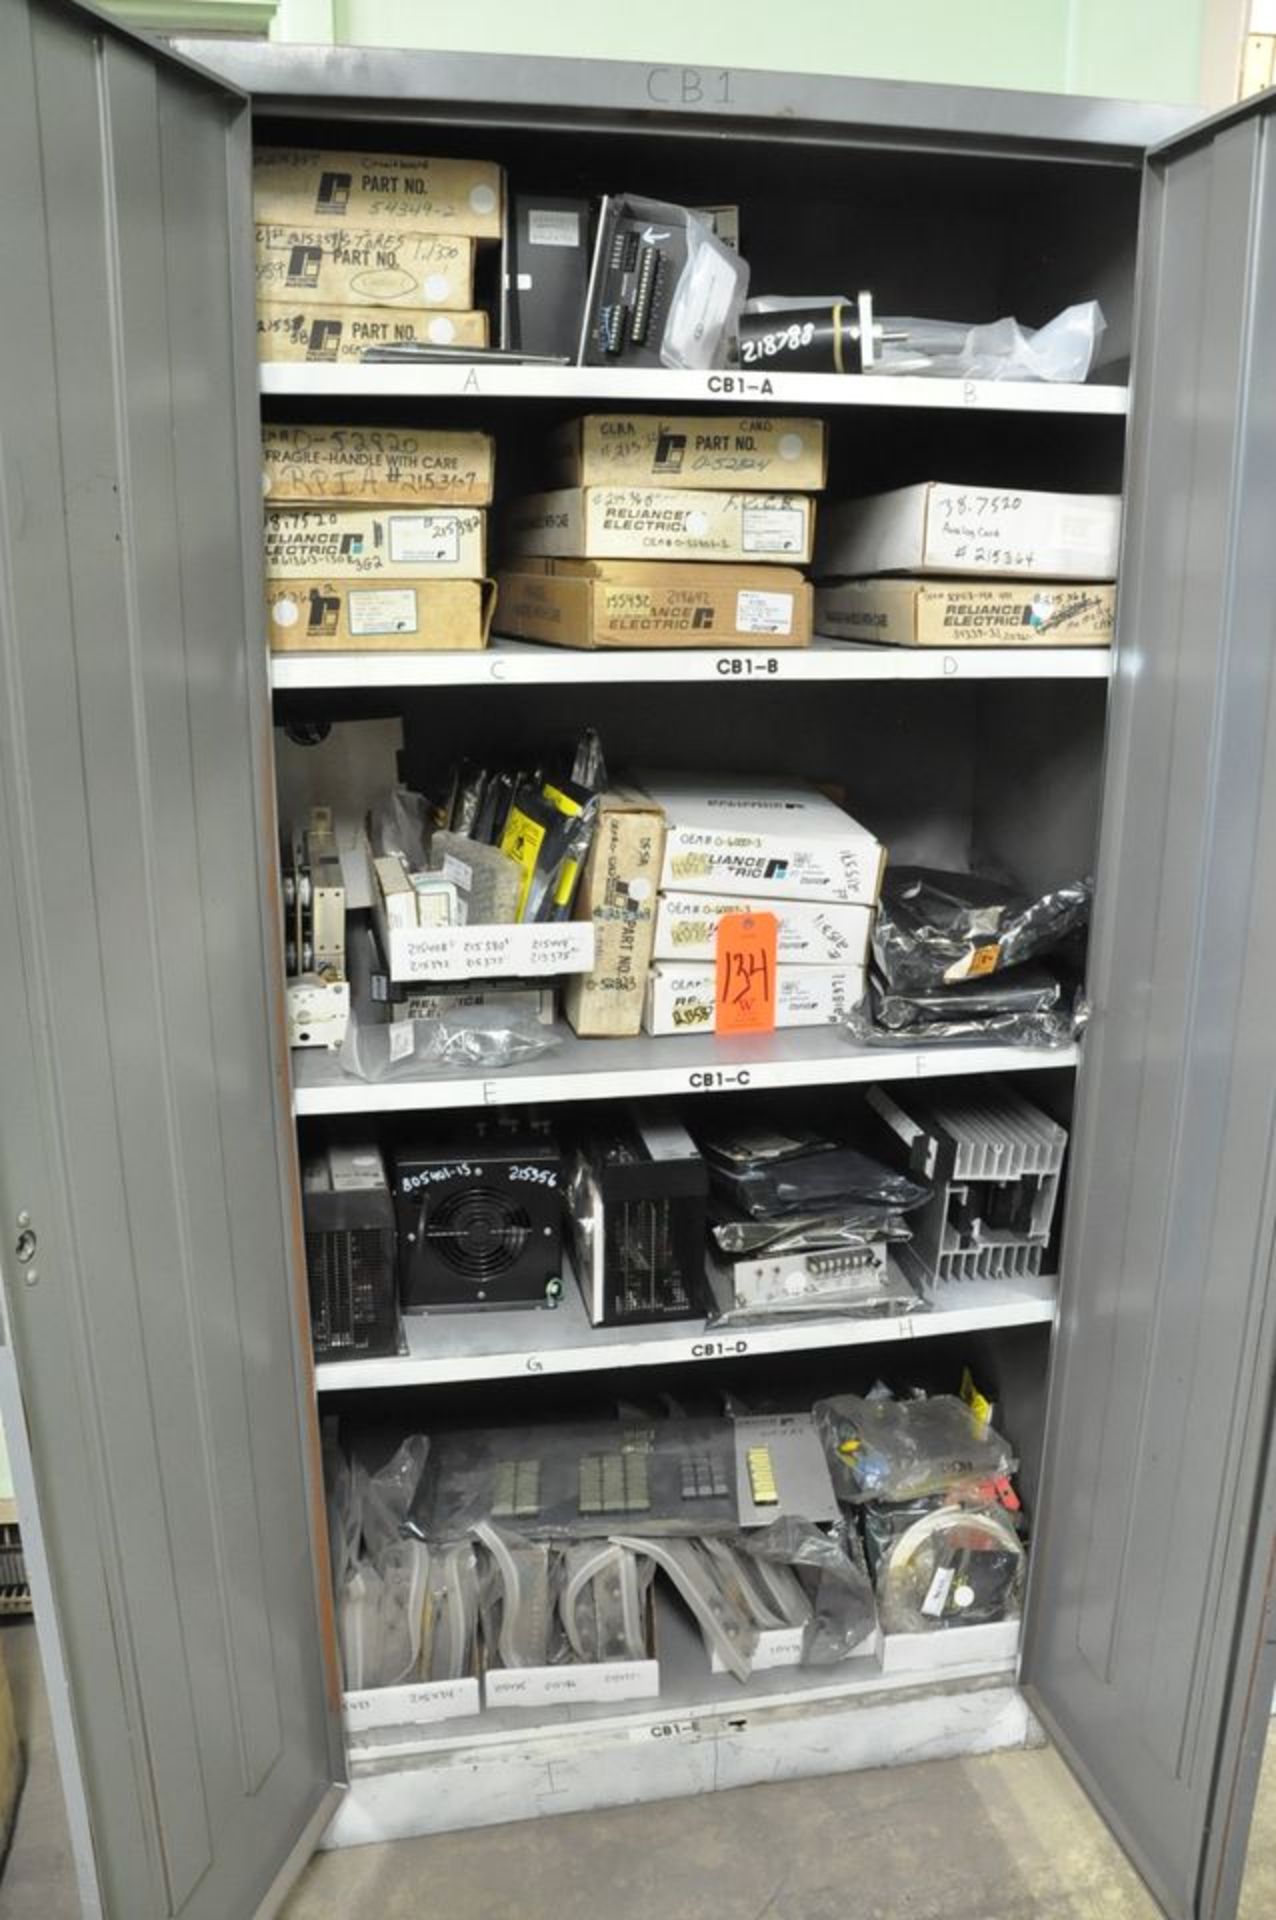 Lot - Power Supplies, Printed Circuit Boards, etc. in (1) Cabinet, (Cabinet Not Included), ( - Image 2 of 5